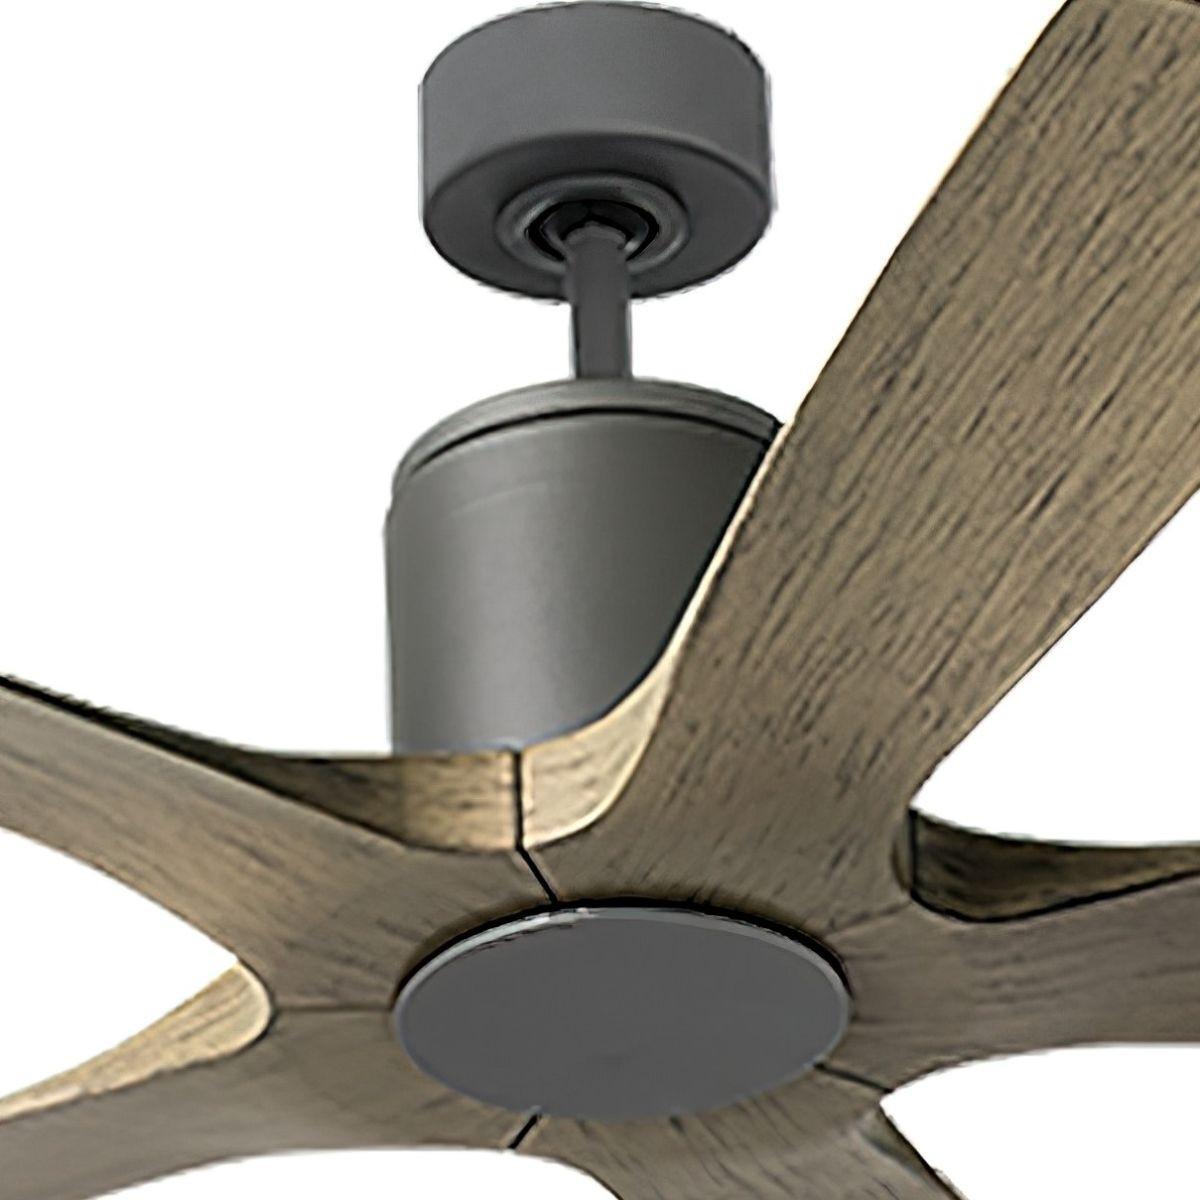 Aviator 5 Blades 54 Inch Outdoor Smart Ceiling Fan With Wall Control - Bees Lighting